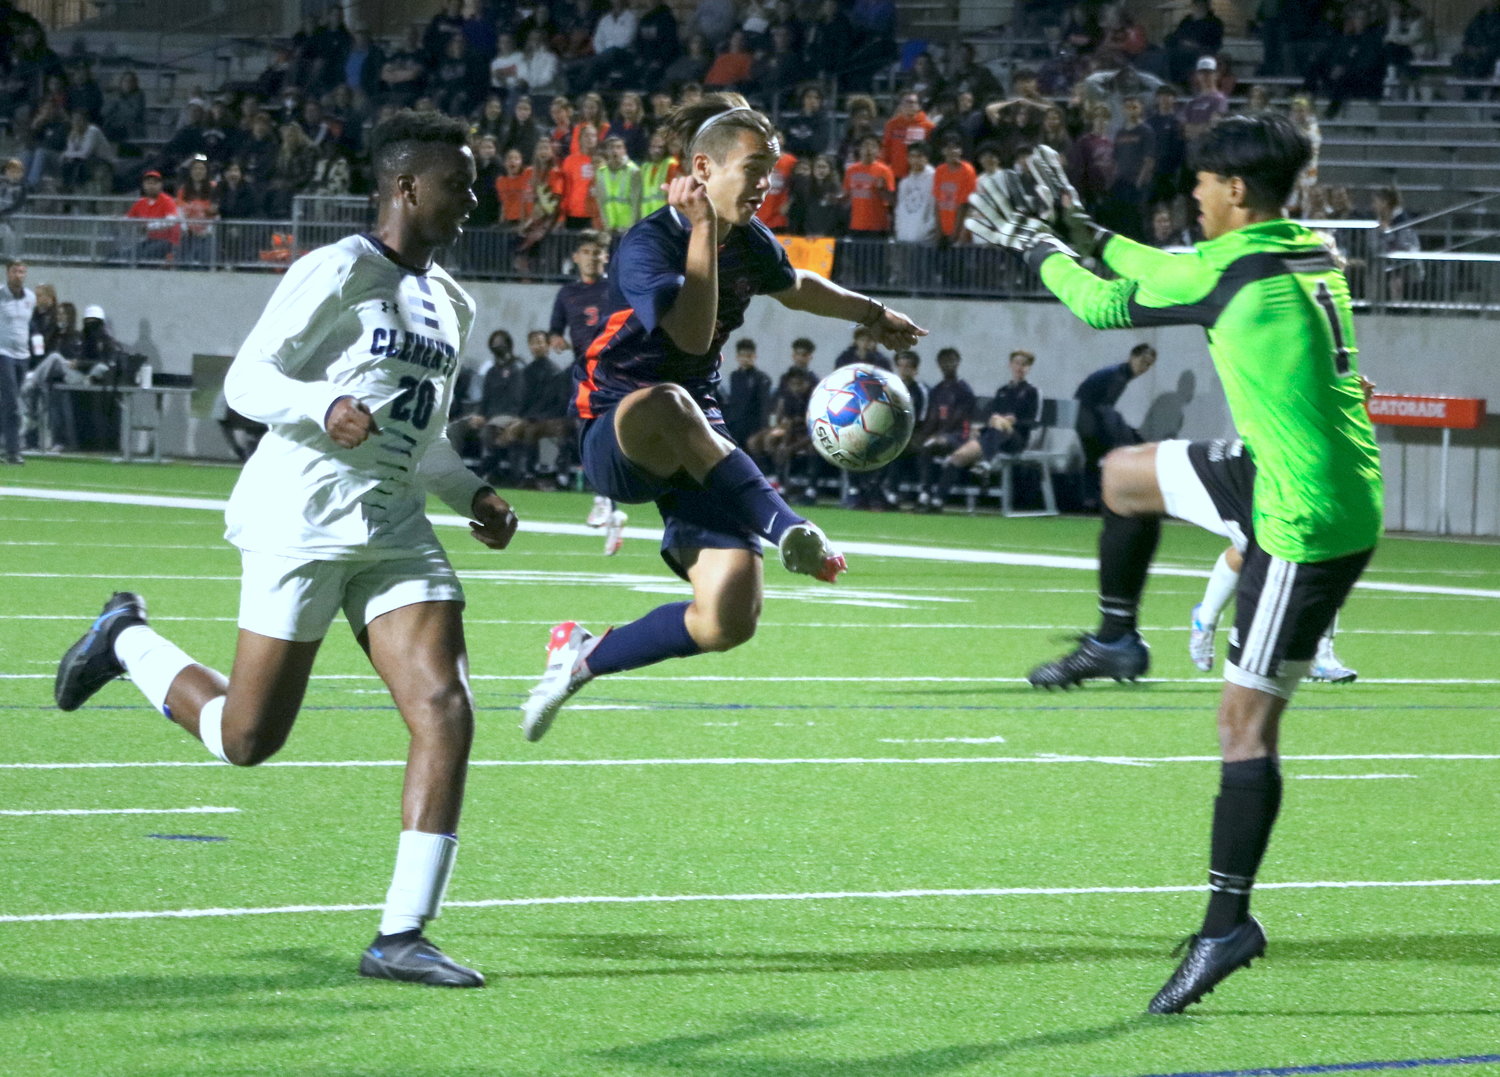 Kortay Koc jumps to try and volley a ball towards goal during Thursday’s Class 6A bi-district game between Seven Lakes and Fort Bend Clements at Legacy Stadium.